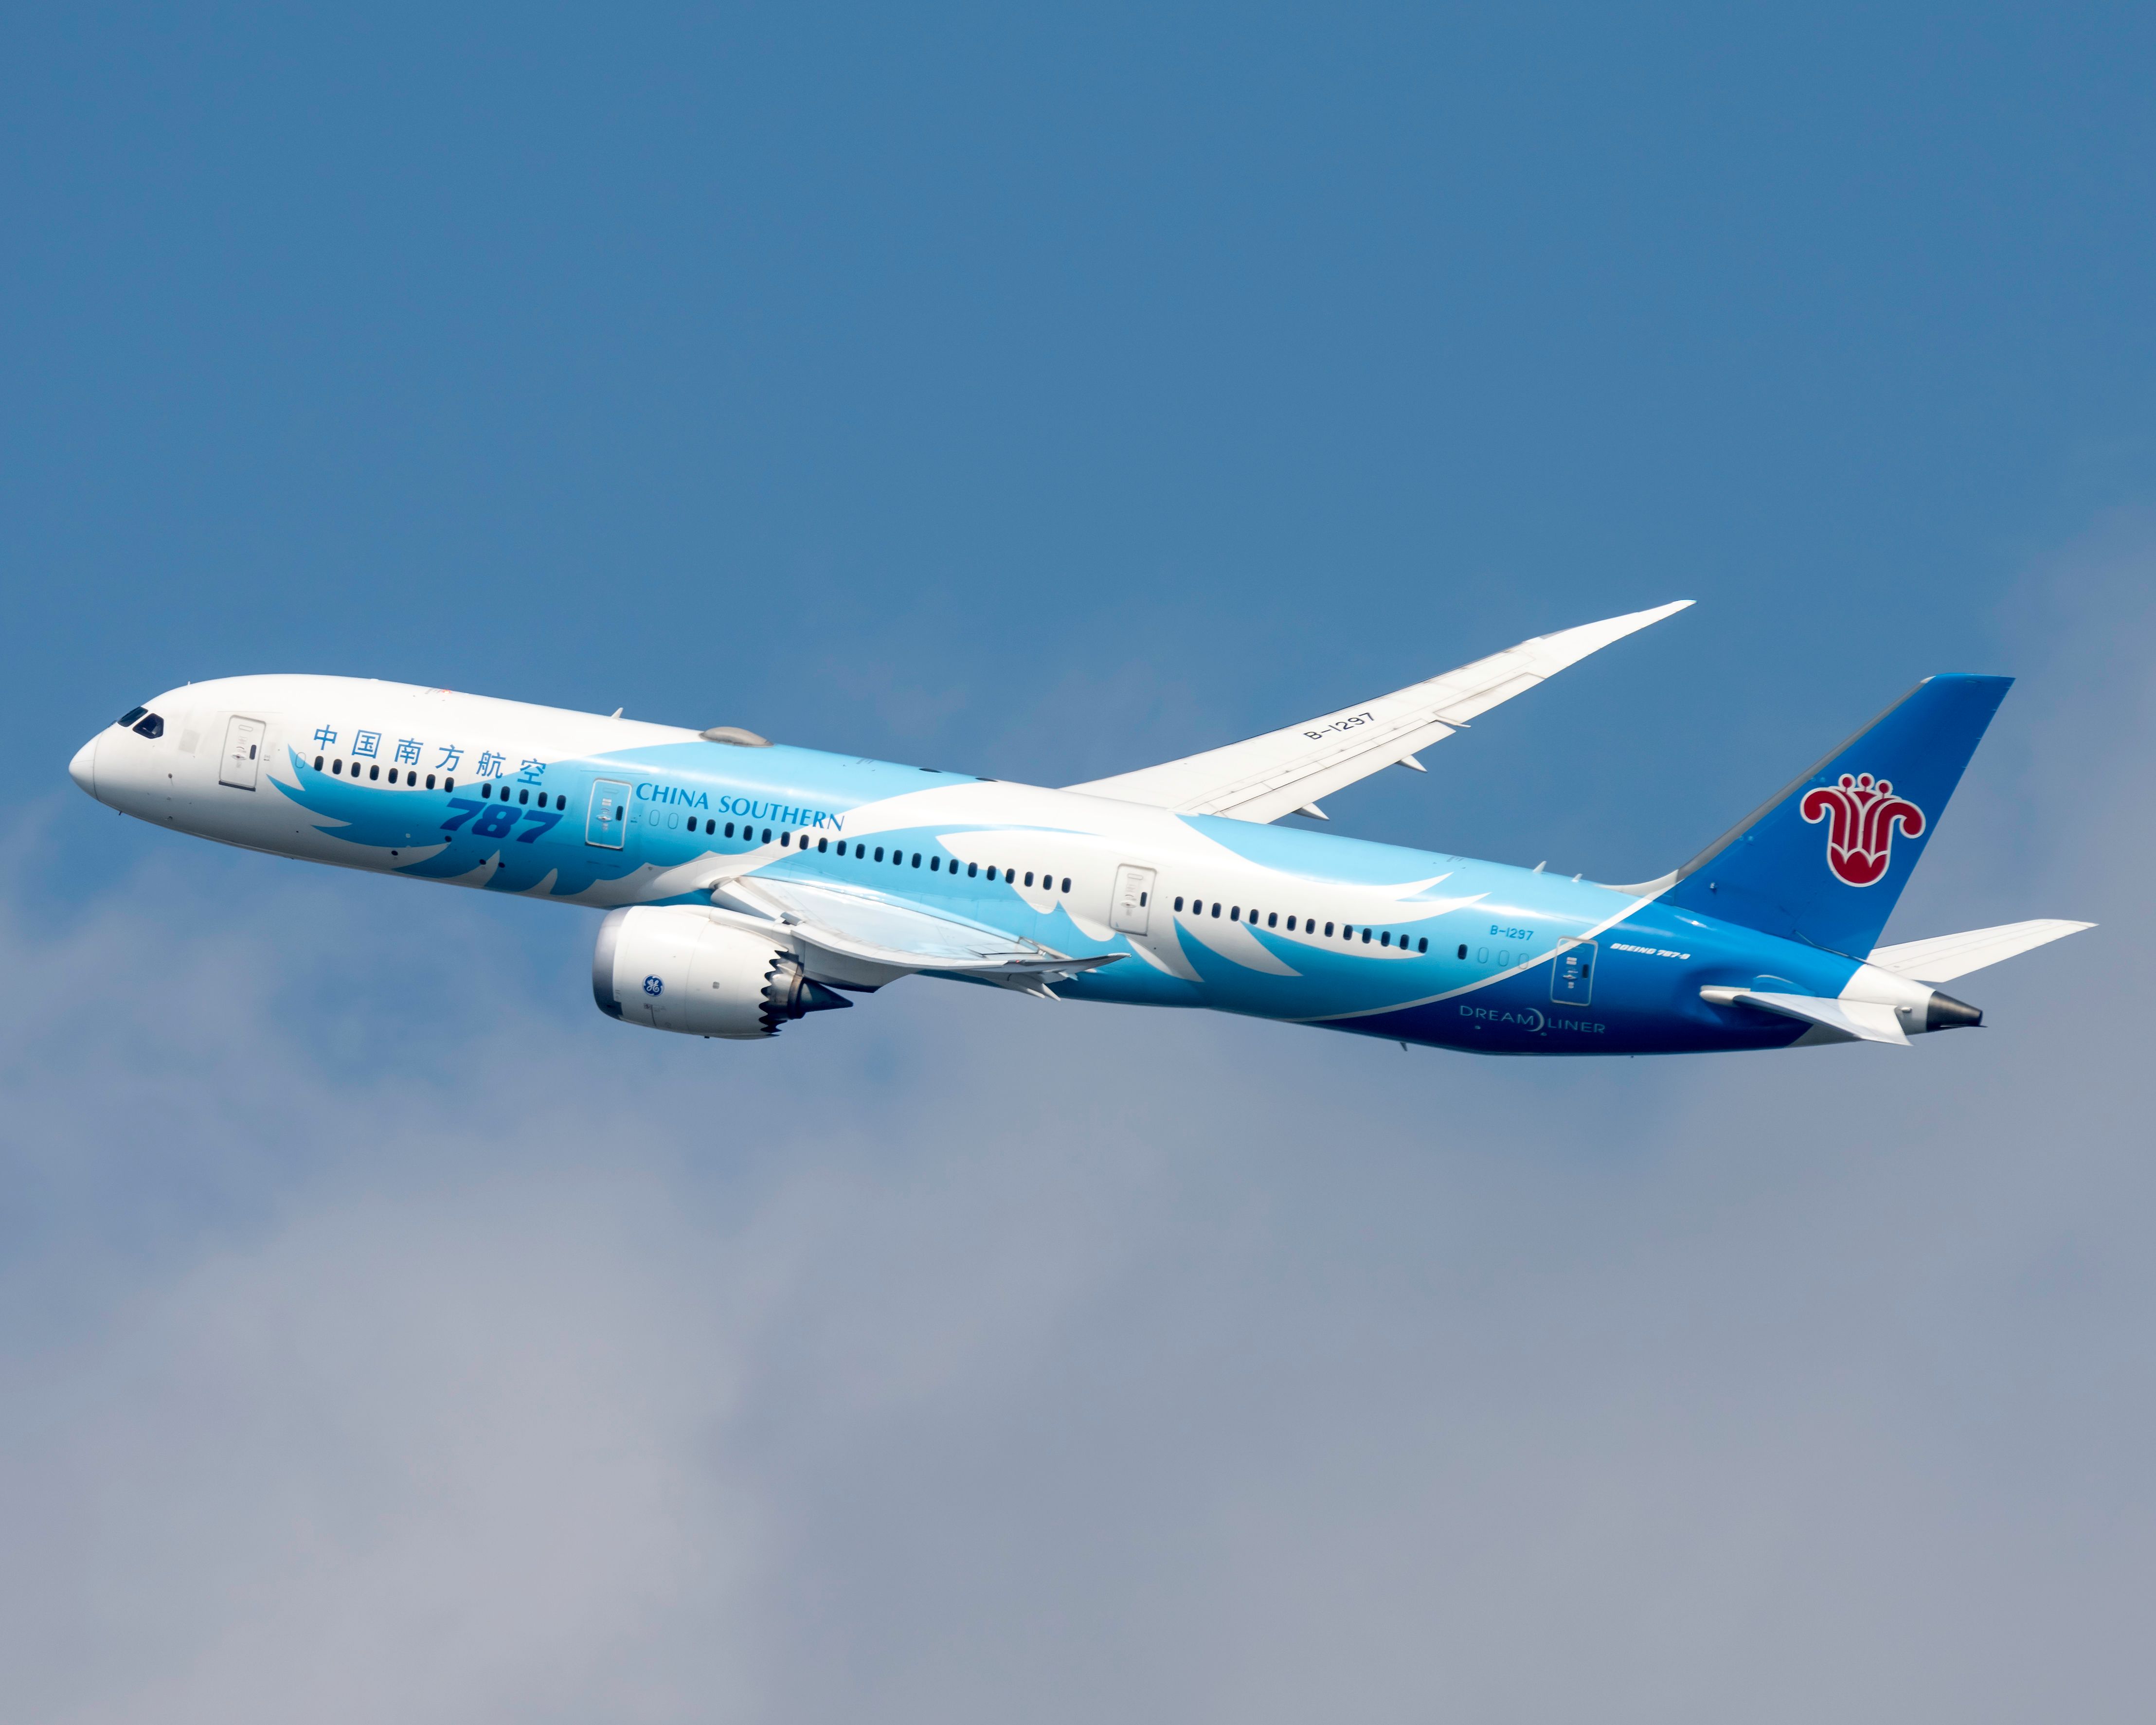 A China Southern Airlines Boeing 787-9 Dreamliner Flying in the sky.